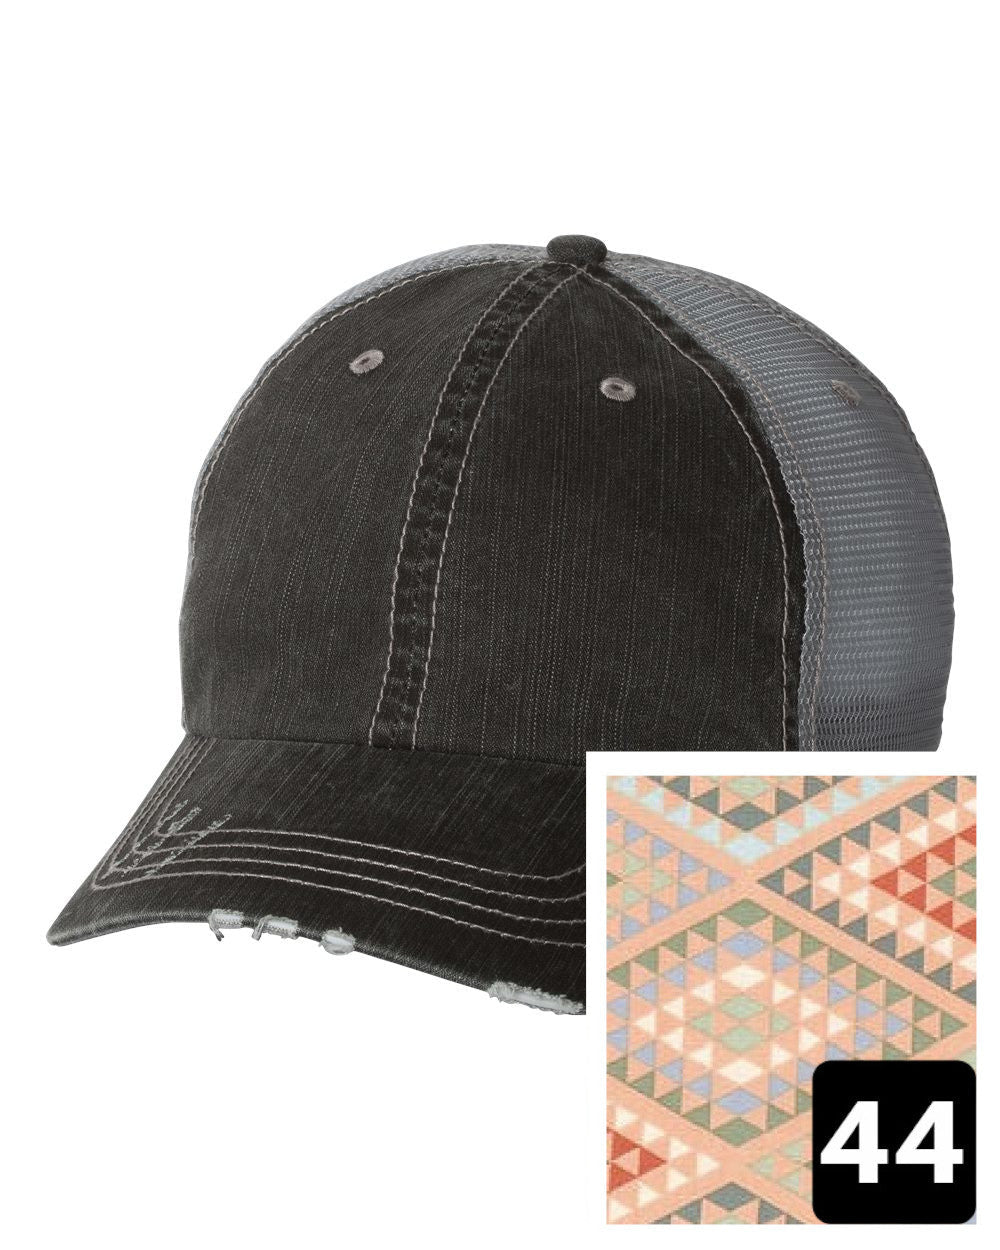 gray distressed trucker hat with navy coral and white chevron fabric state of Texas